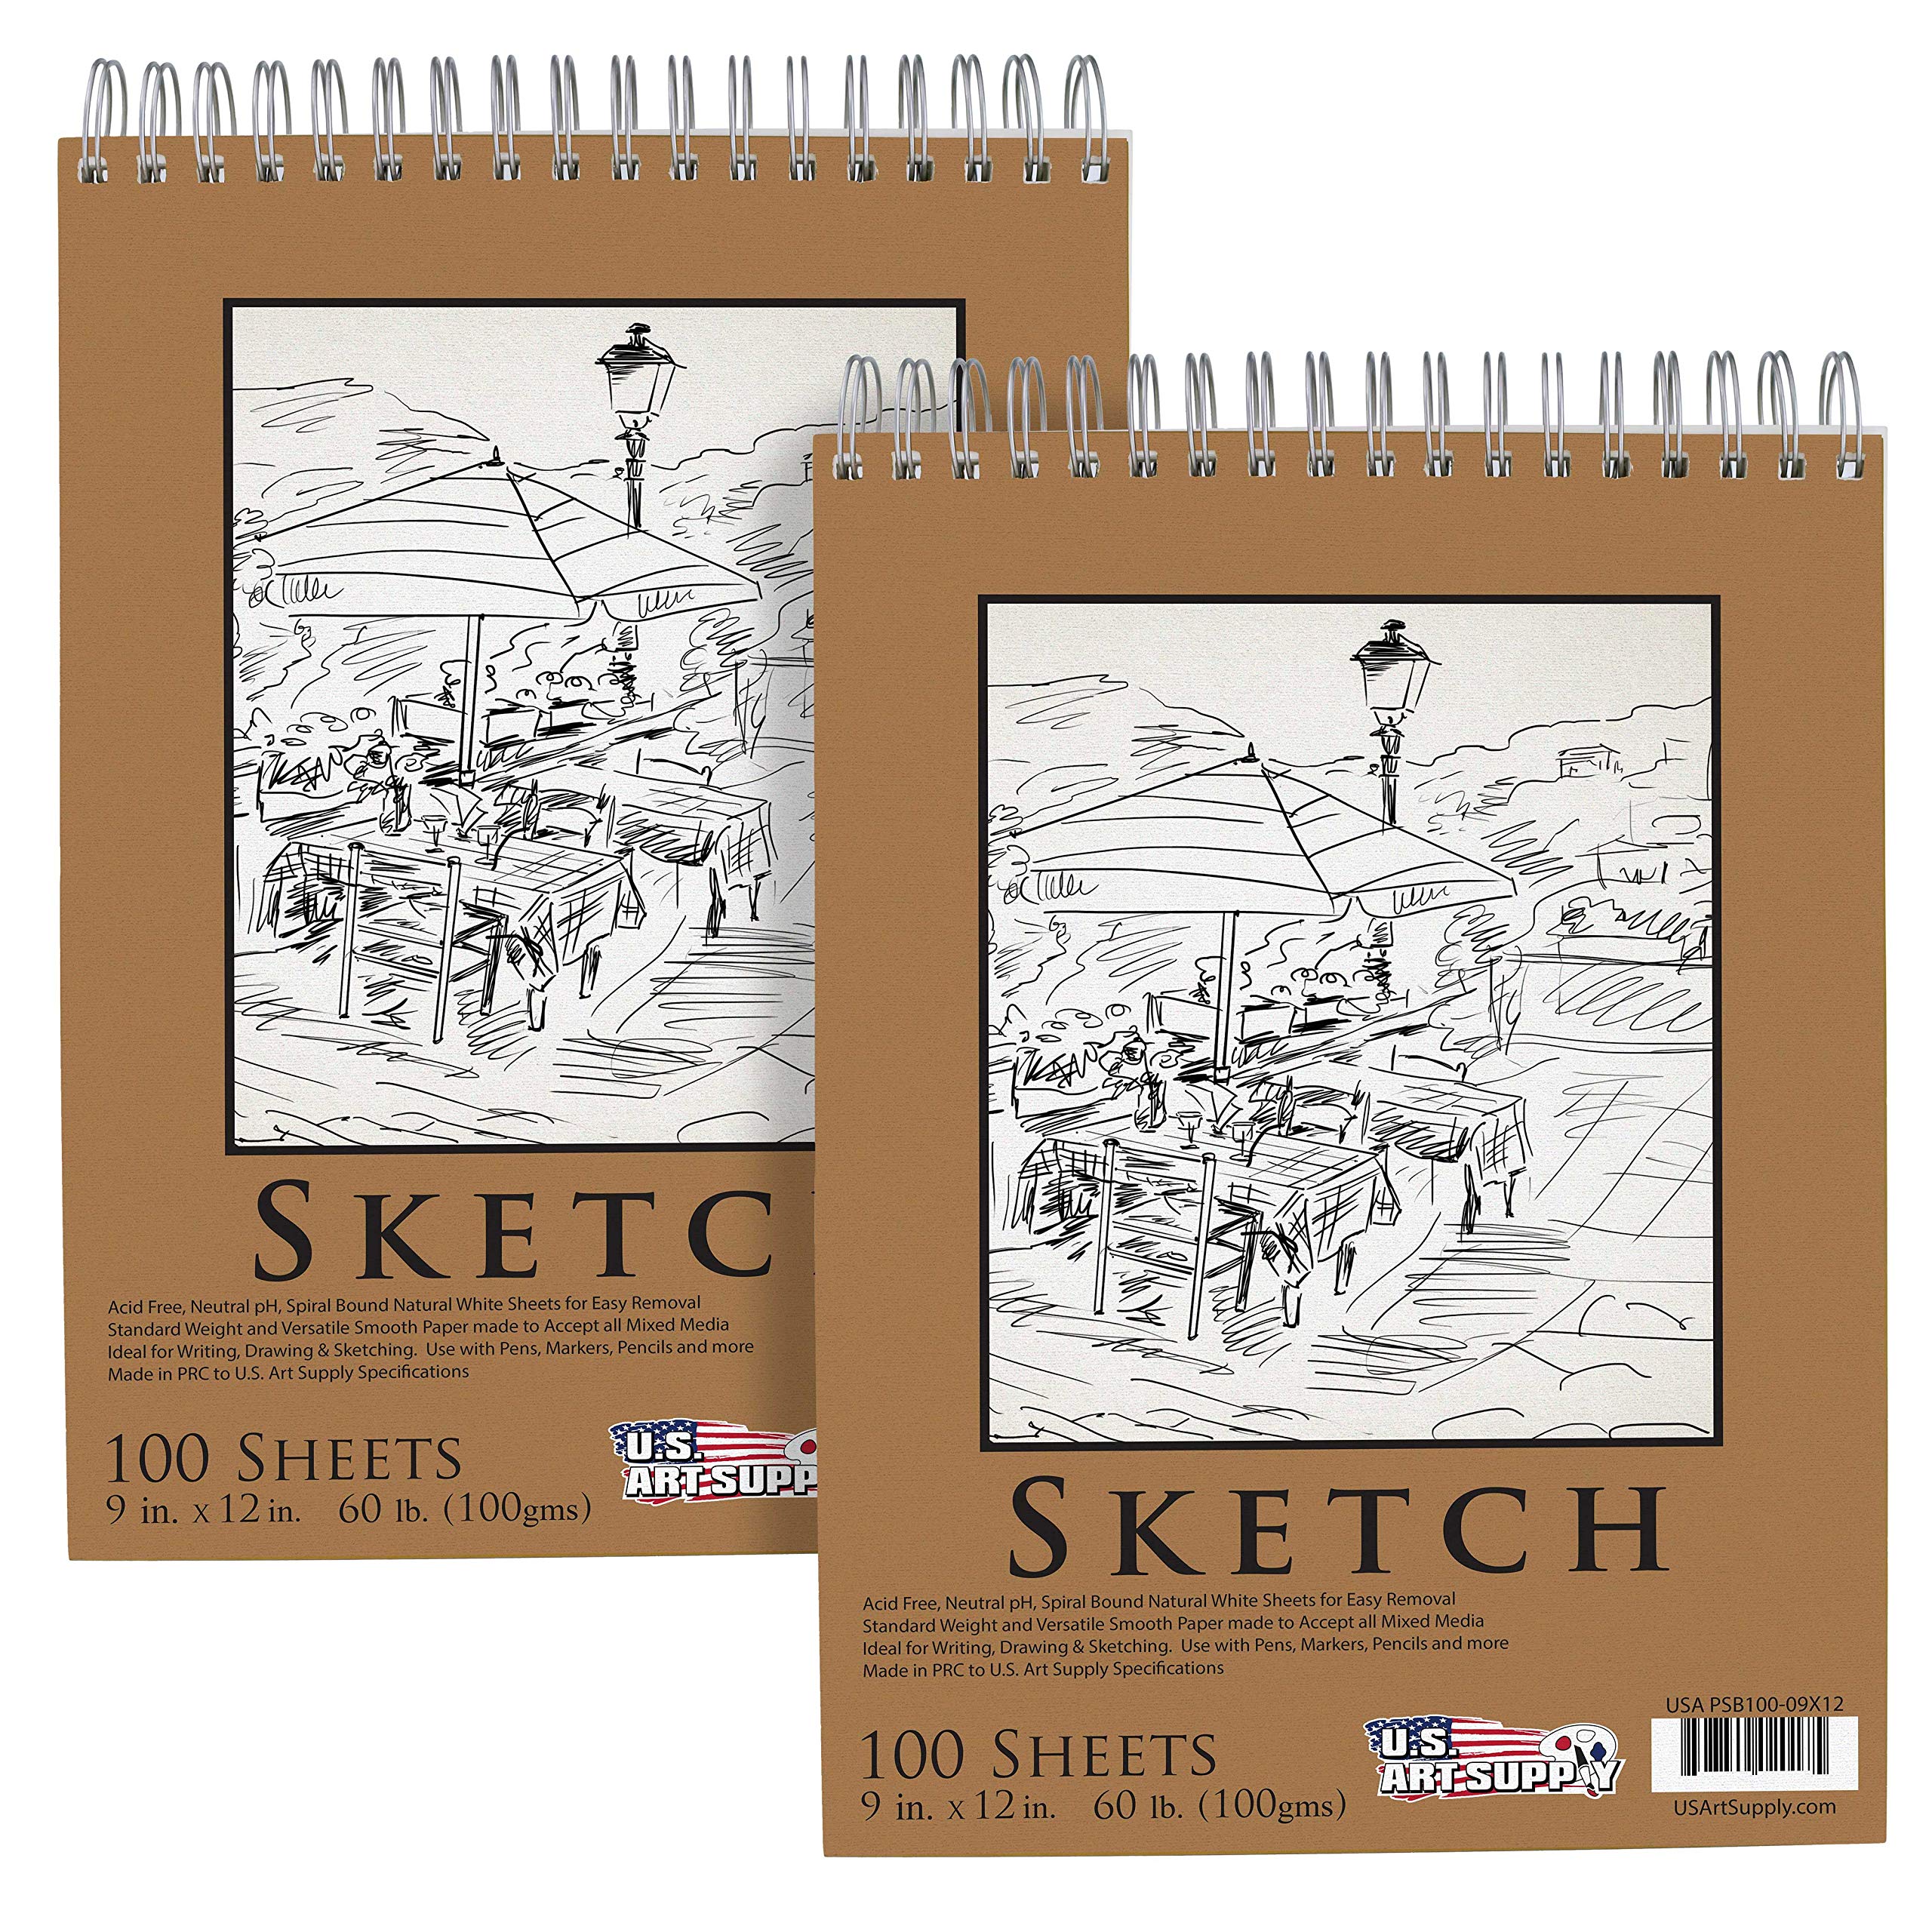 The Top Sketchbooks in 2023 - Charlotte Observer's Top Reviews